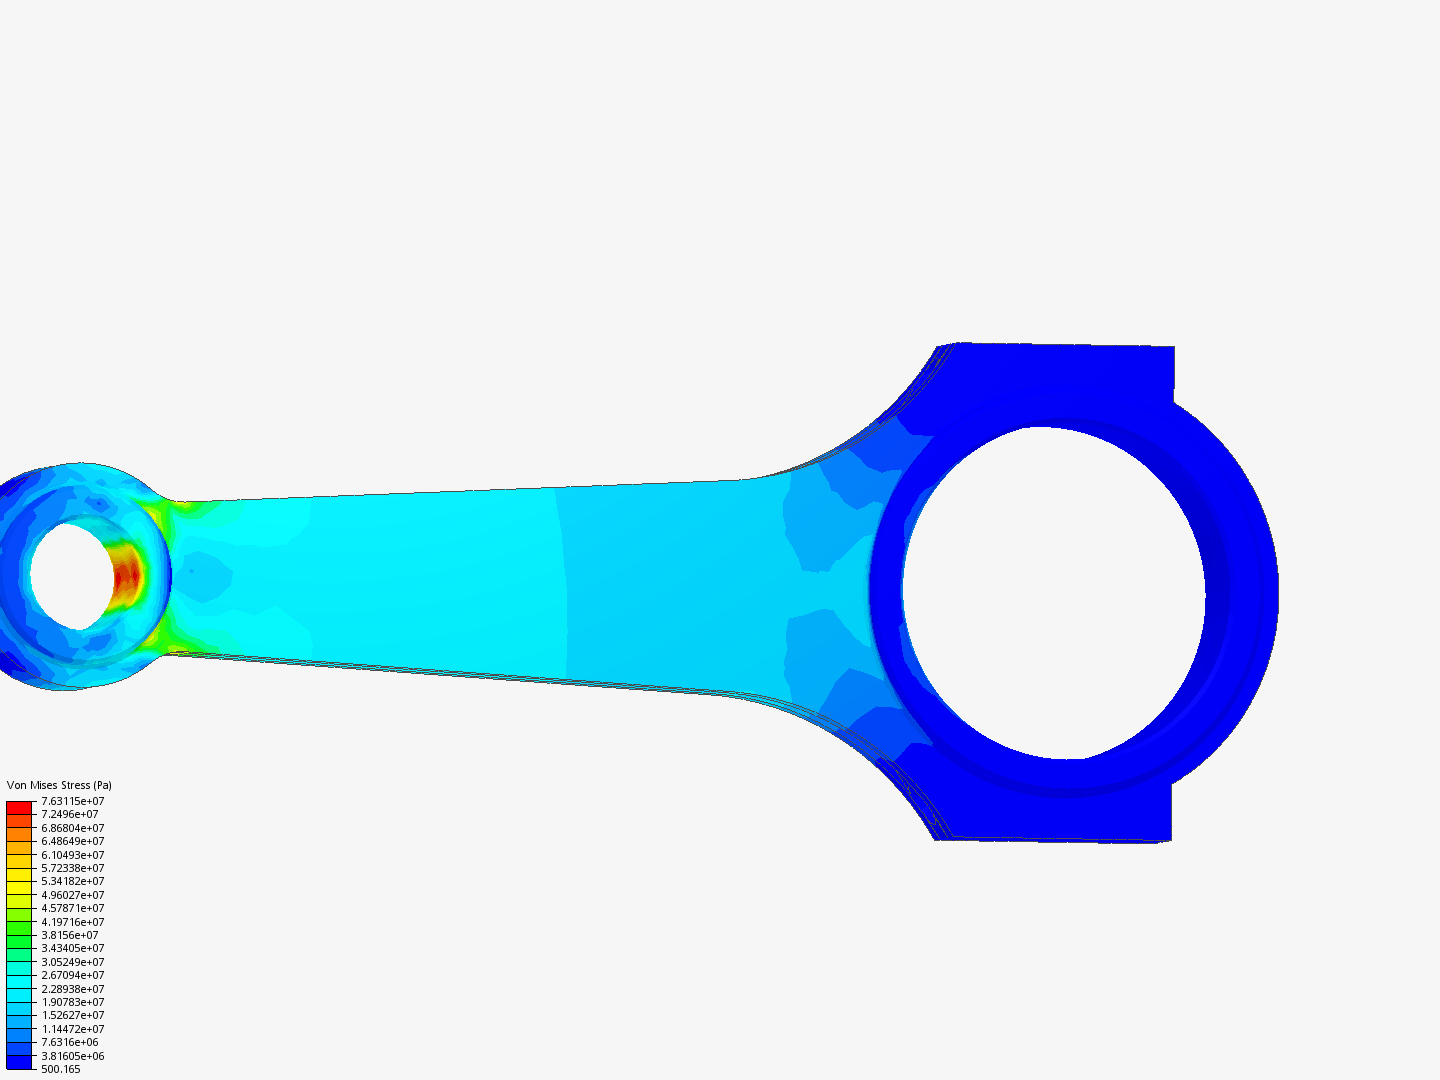 Analysis of connecting rod image